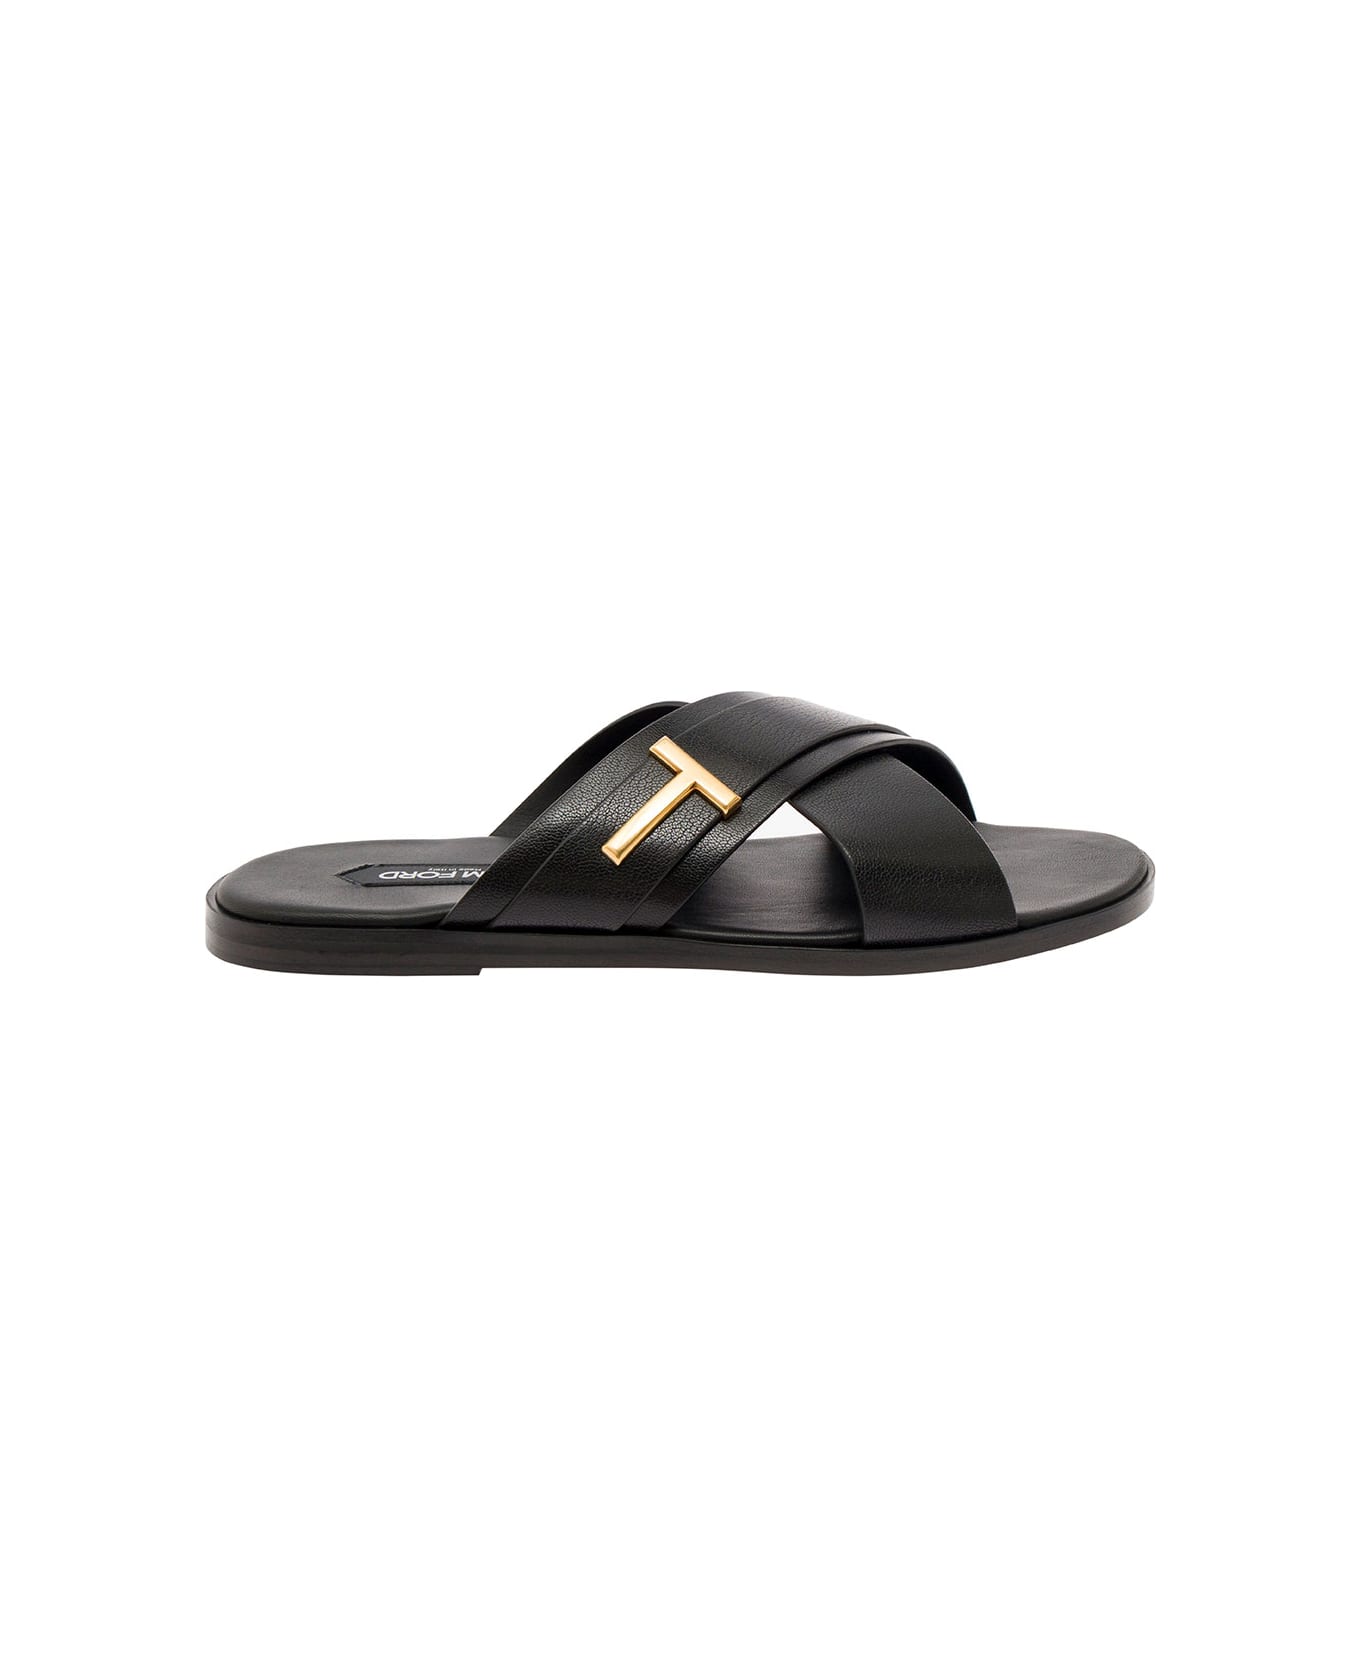 Tom Ford 'preston' Black Flat Sandals With T Detail In Leather Man - Black